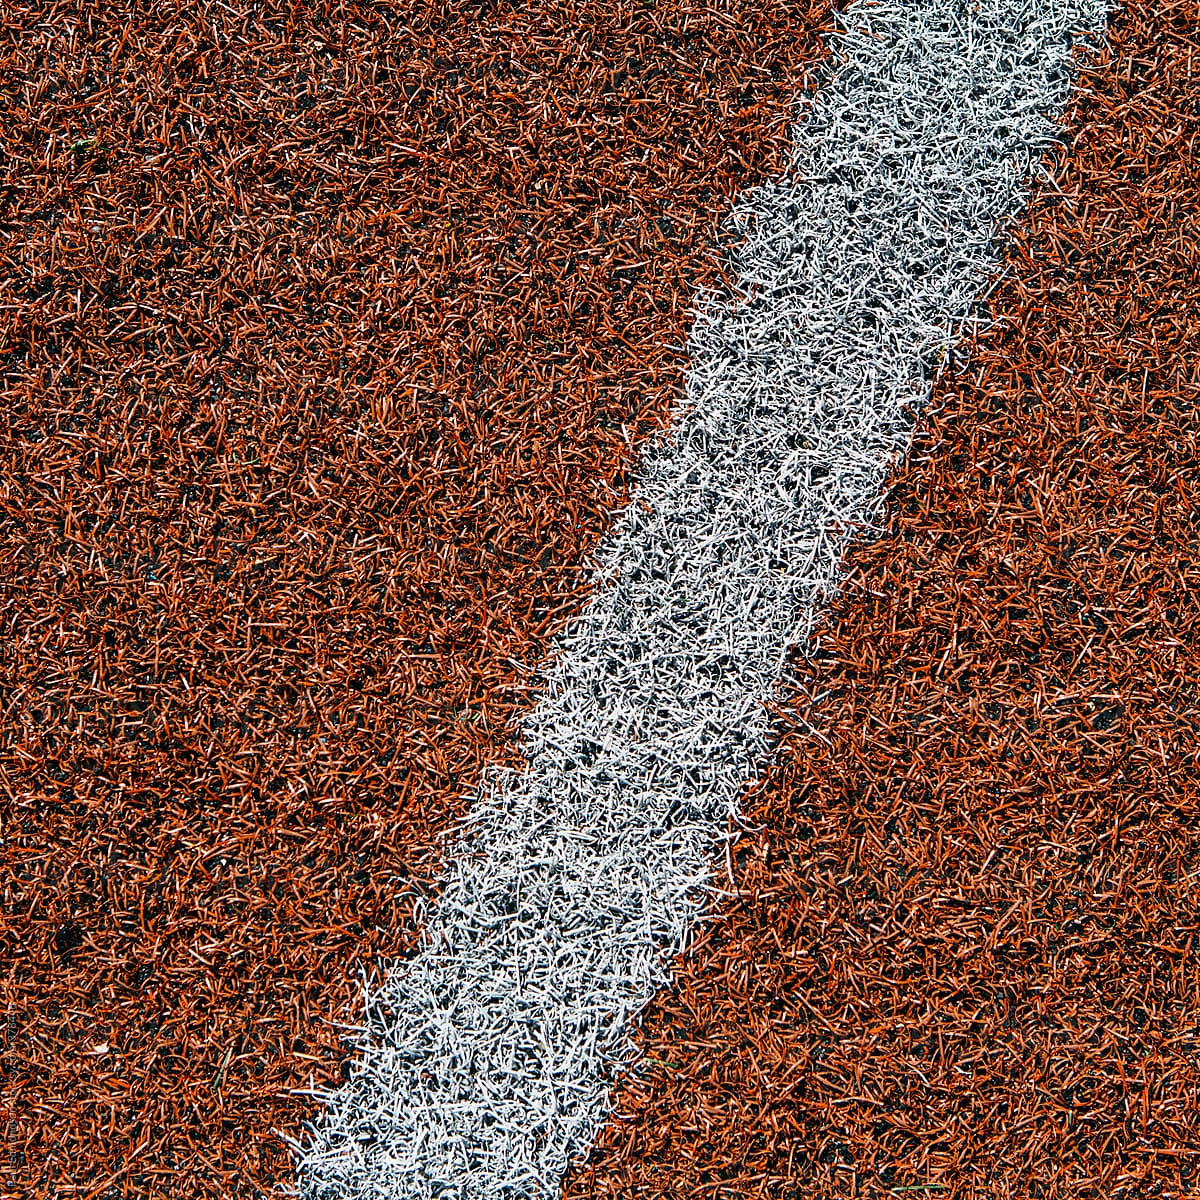 Boundary lines on artificial turf sports field